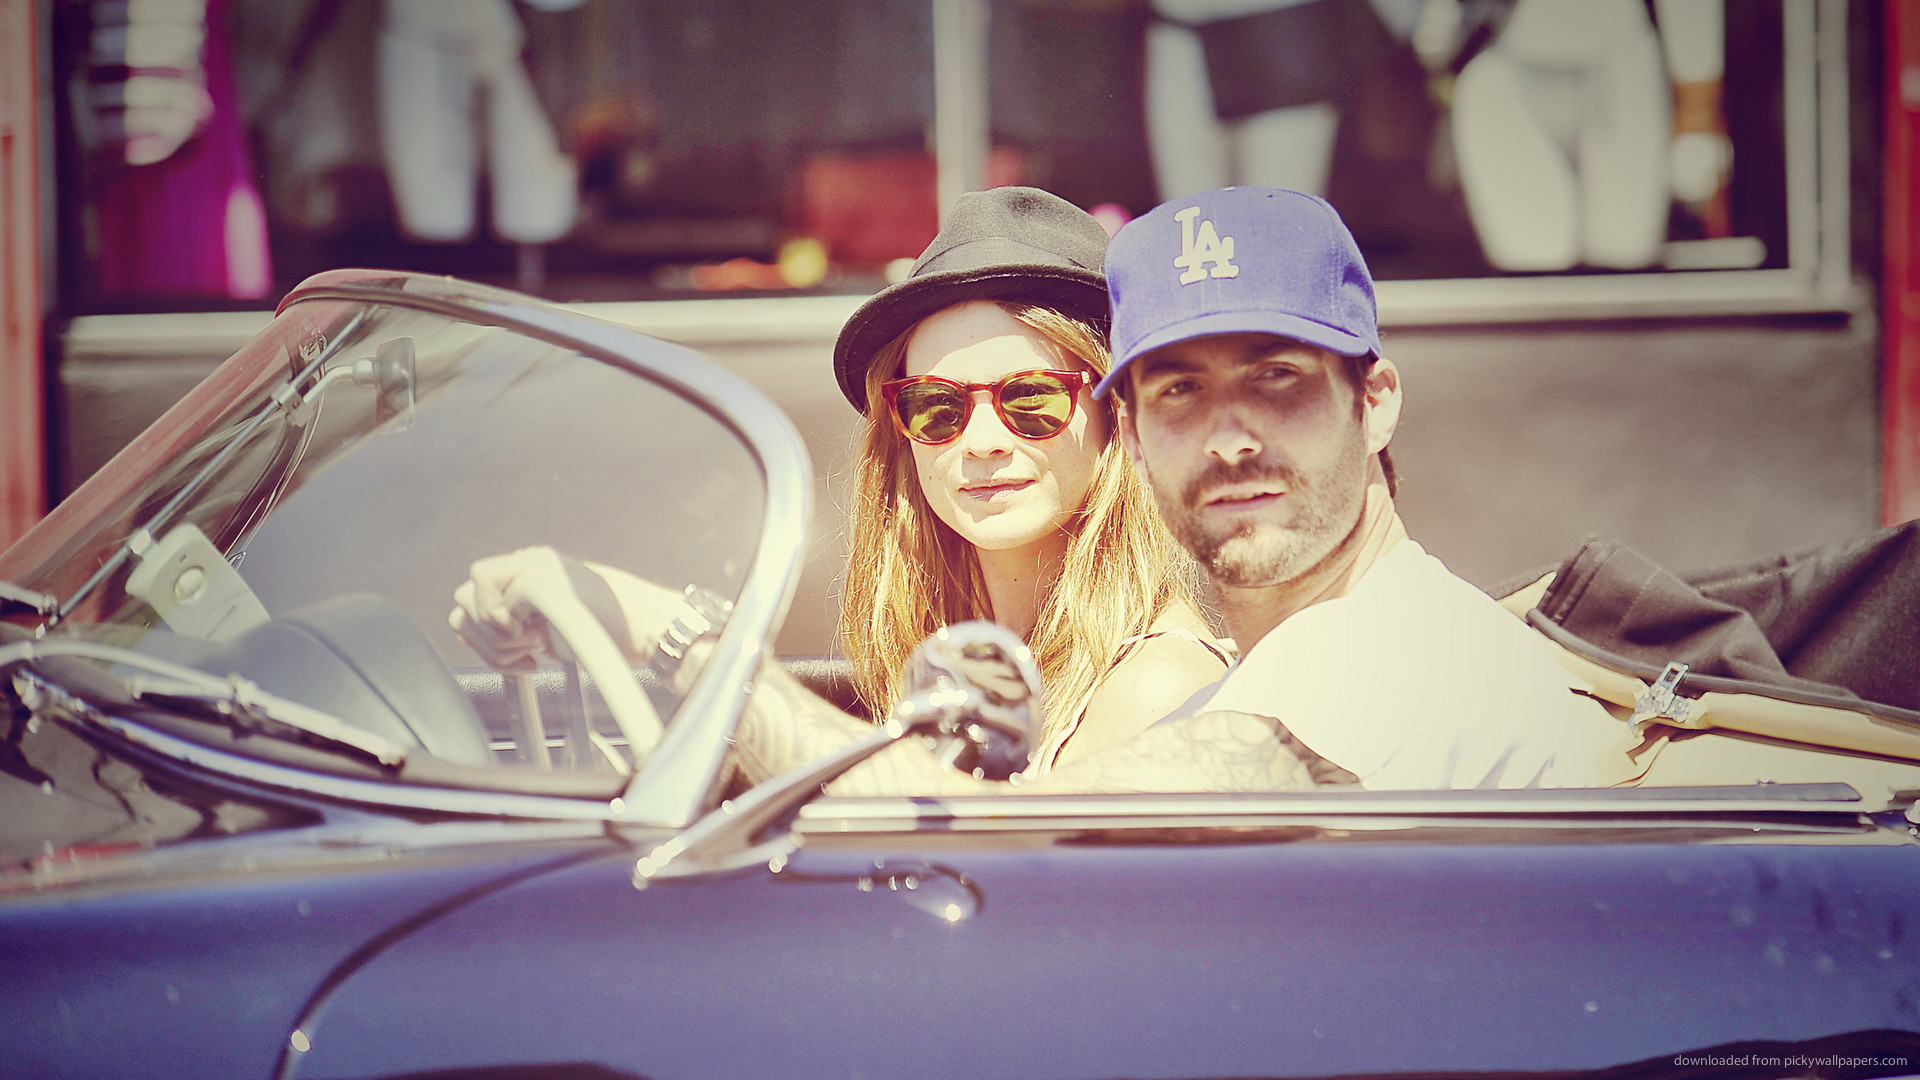 1920x1080 Adam Levine and Behati Prinsloo in a retro car for 